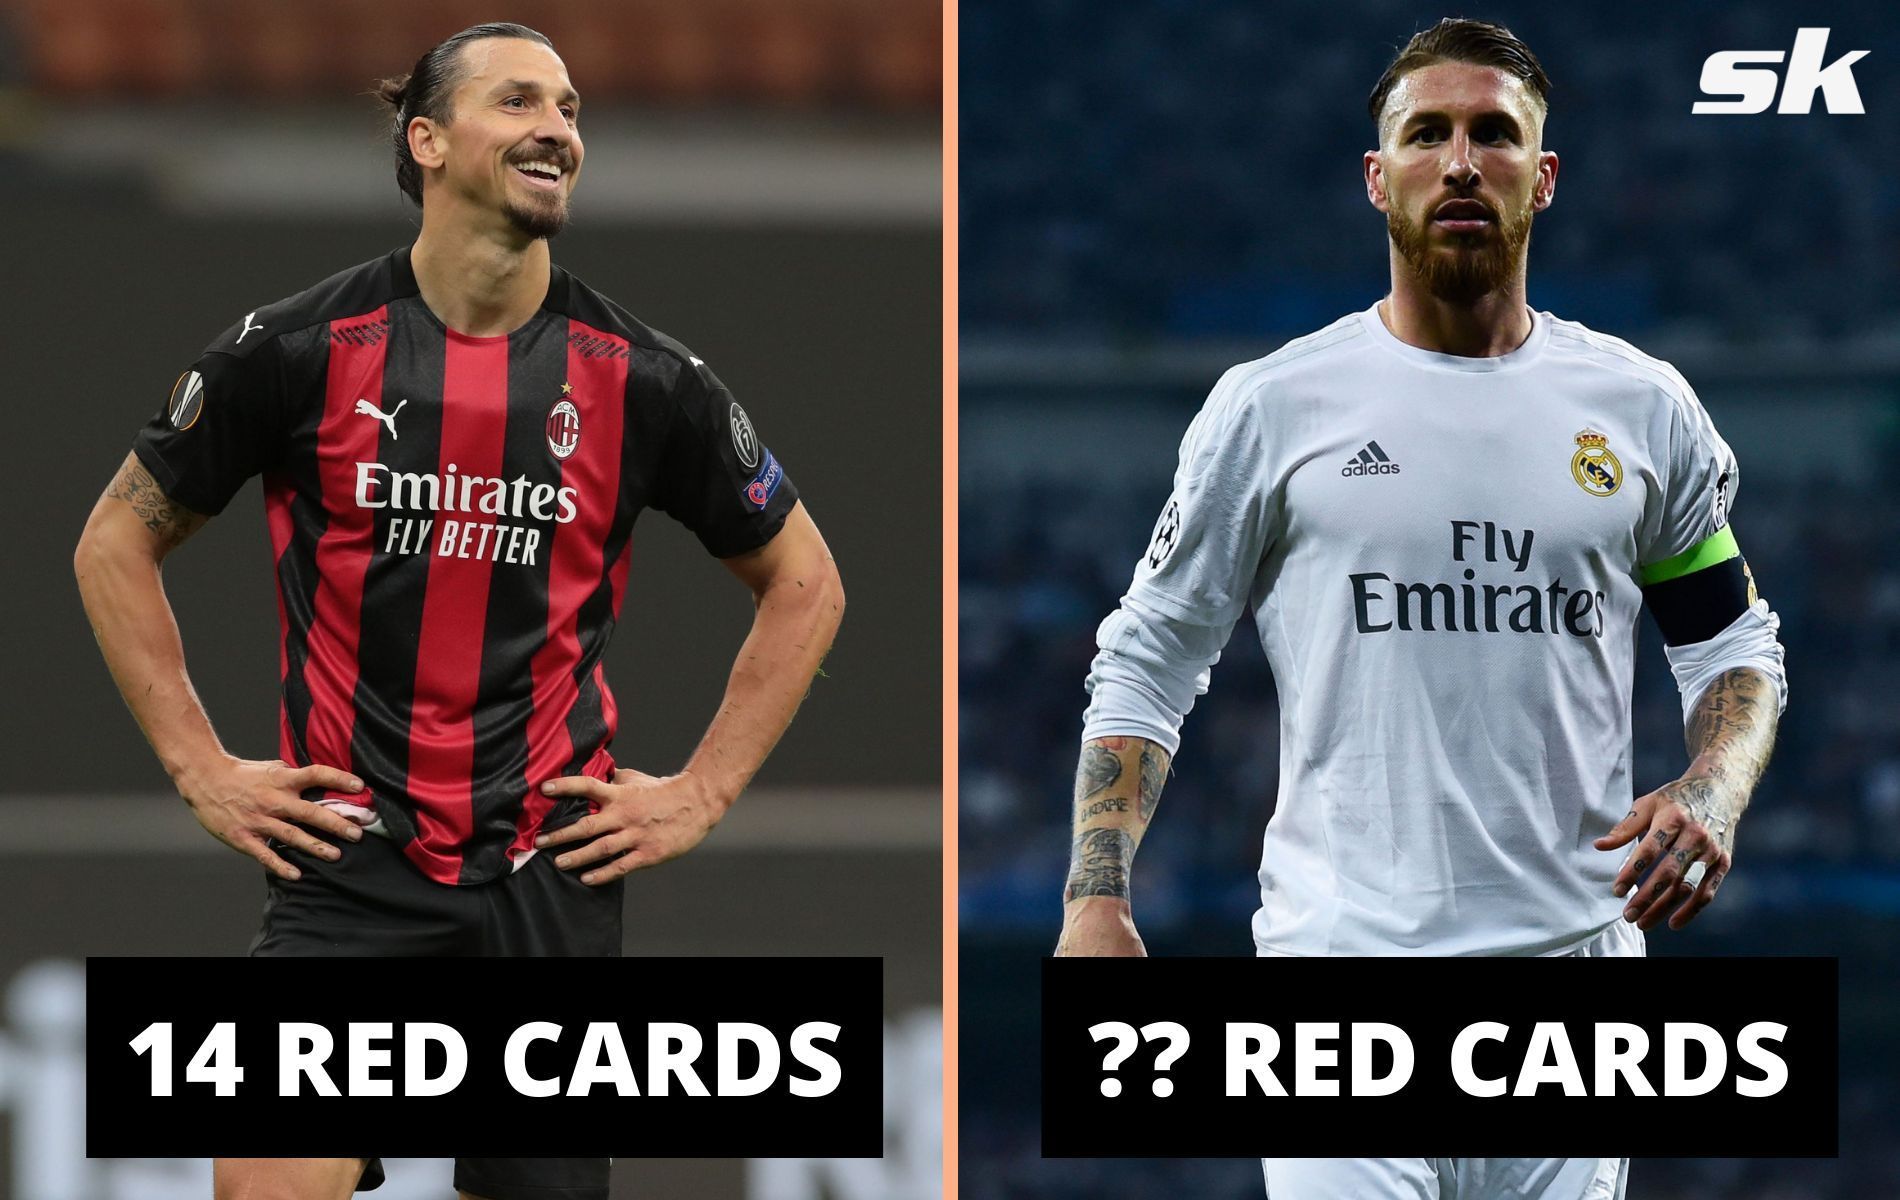 Zlatan Ibrahimovic and Sergio Ramos have been sent off quite a lot in their football career